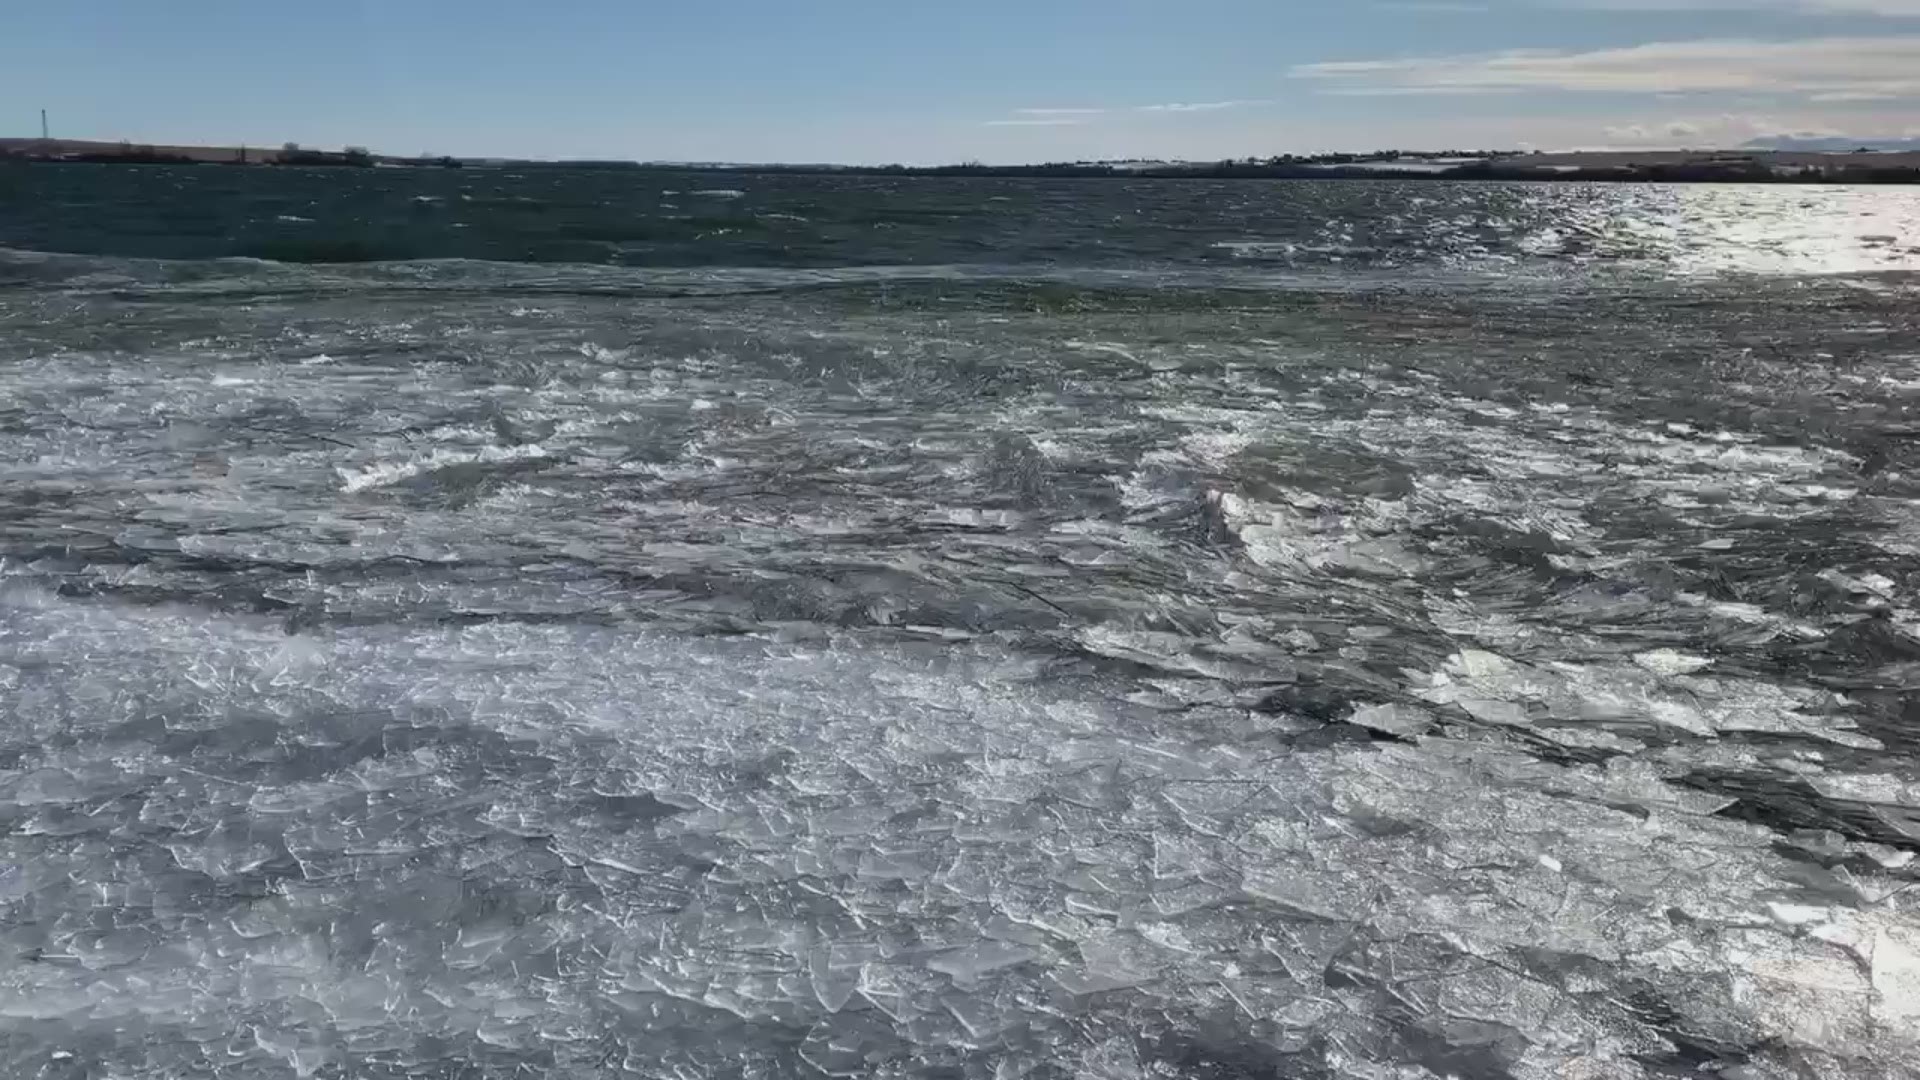 Wind gusts on Jan. 15 apparently created rolling ice shards on Lake Lowell in the Deer Flat National Wildlife Refuge in Nampa, according to Jean Reed.